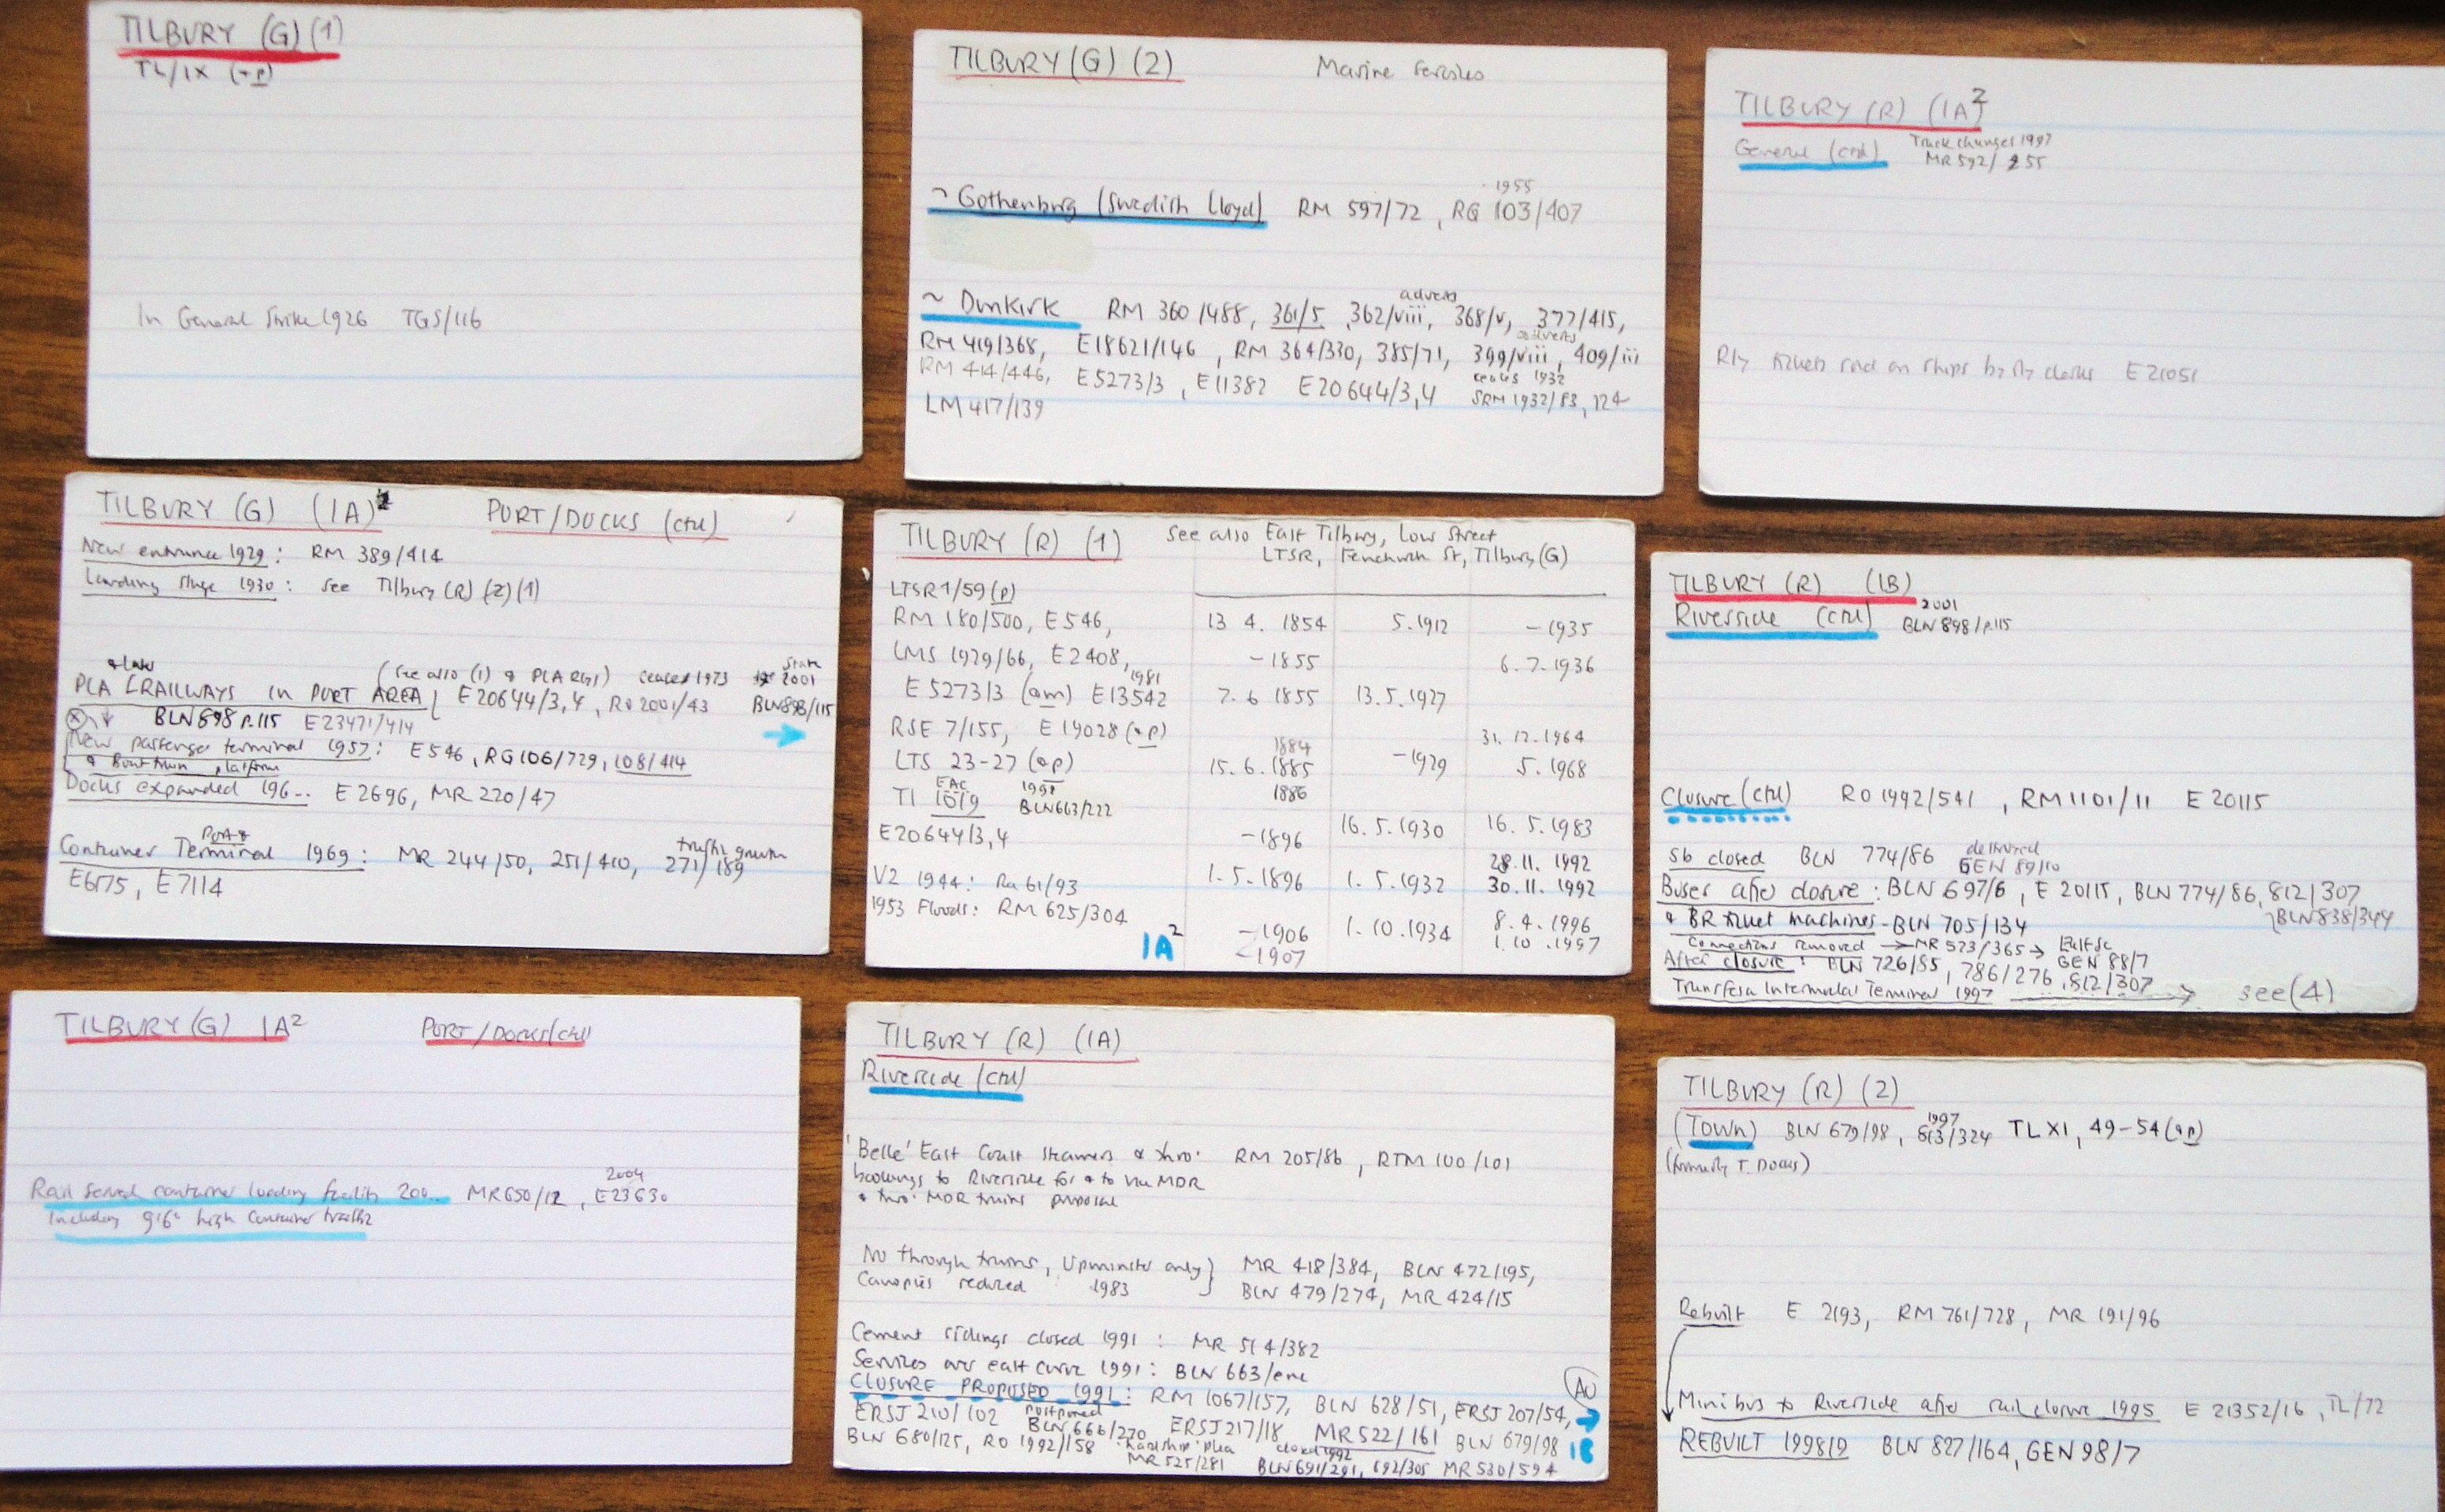 The cards are hand-written and involve quite a bit of detective work to decode